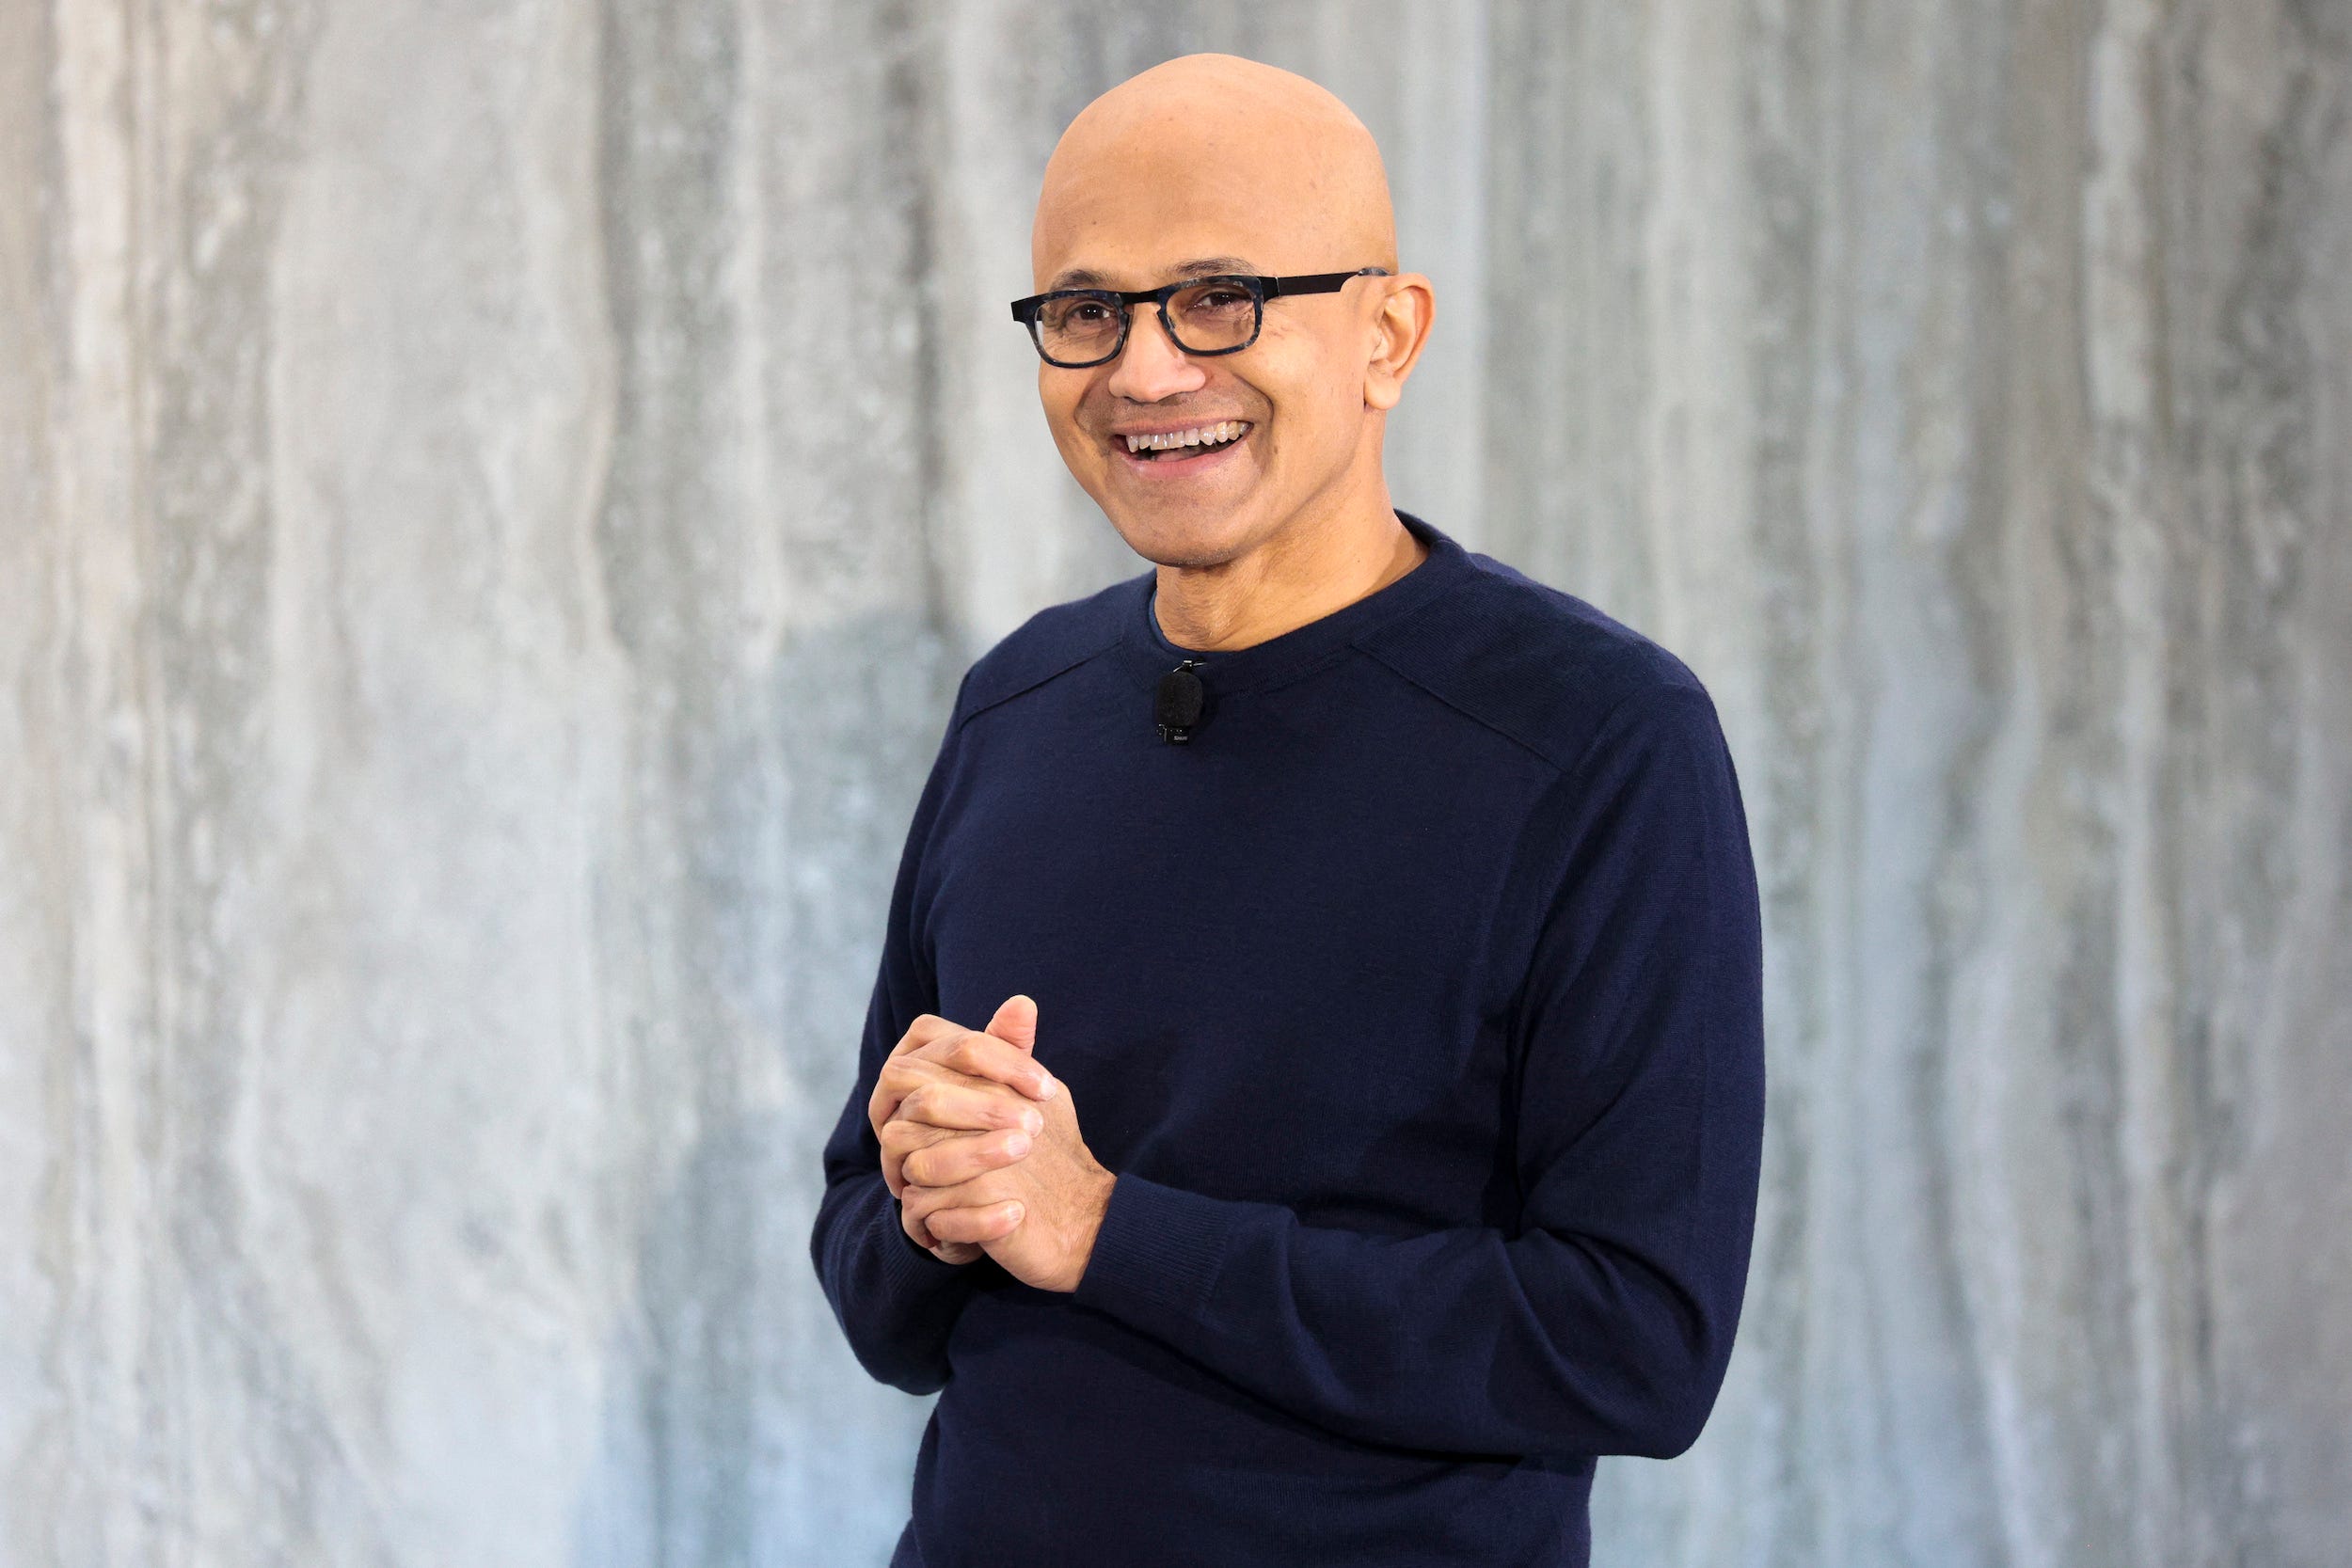 microsoft, tech layoffs are hitting companies that are doing just fine